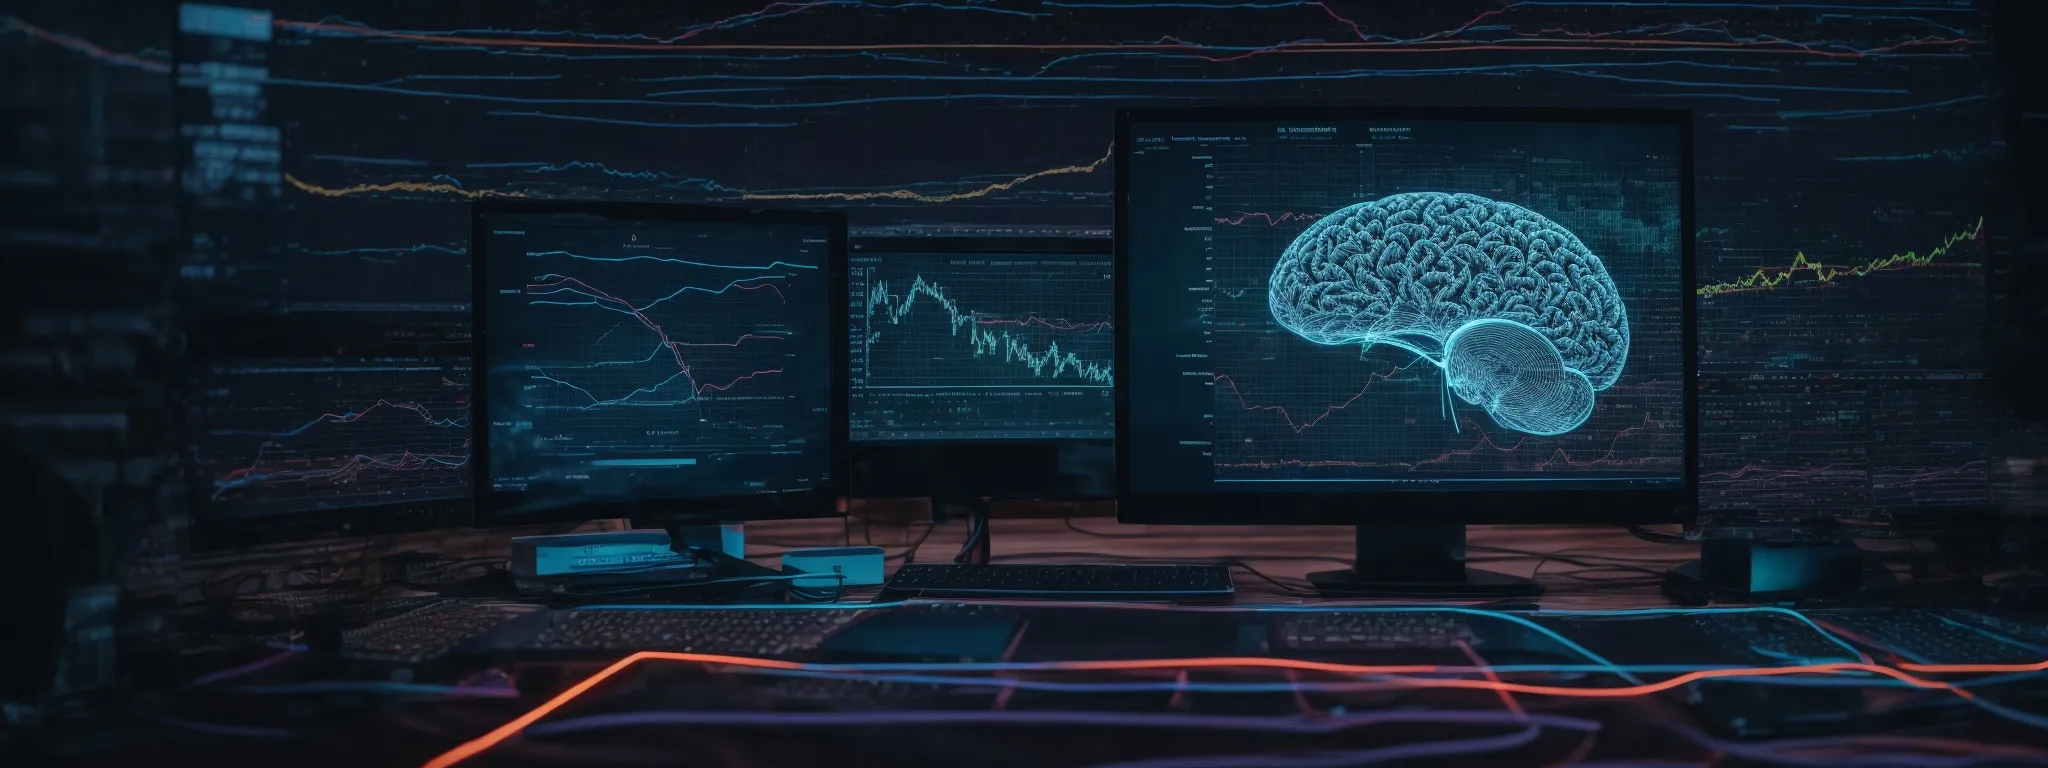 a computer screen displaying graphs and analytics reflecting seo performance trends with an overlay of ai-related icons such as a brain or circuit patterns.